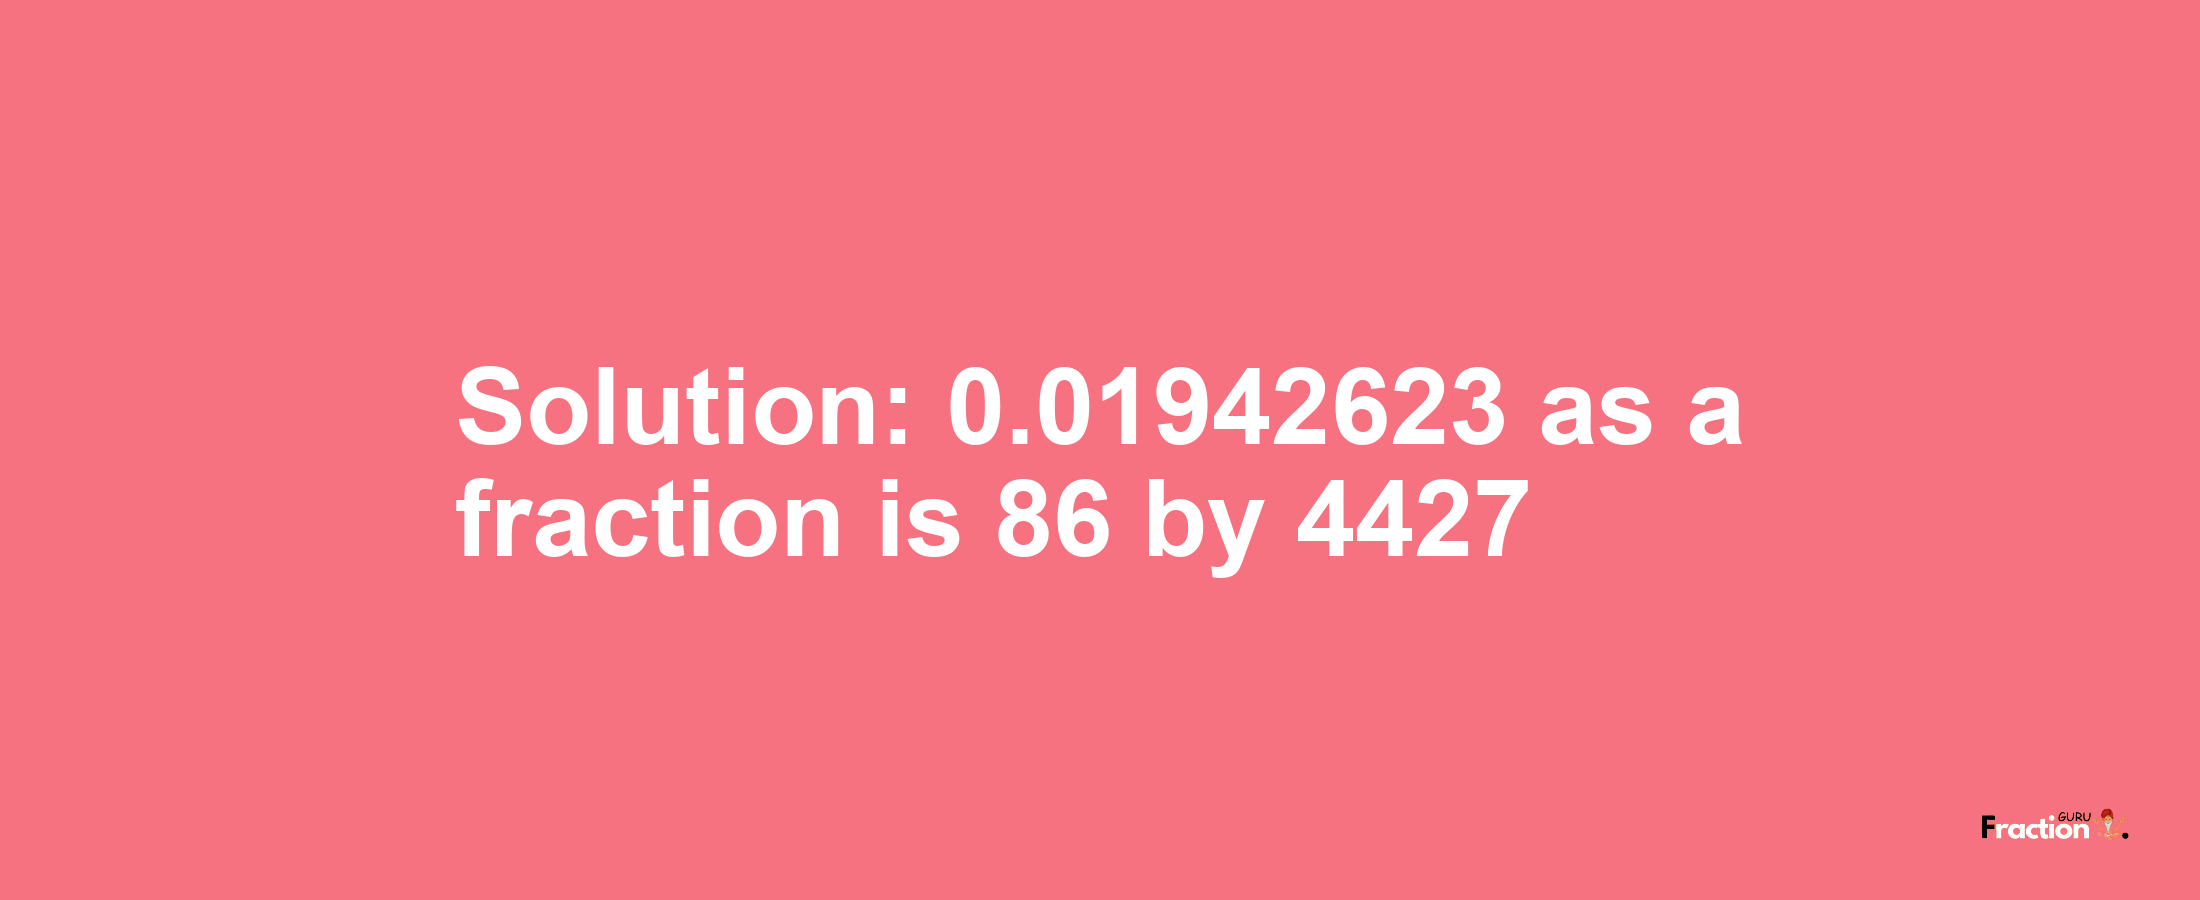 Solution:0.01942623 as a fraction is 86/4427